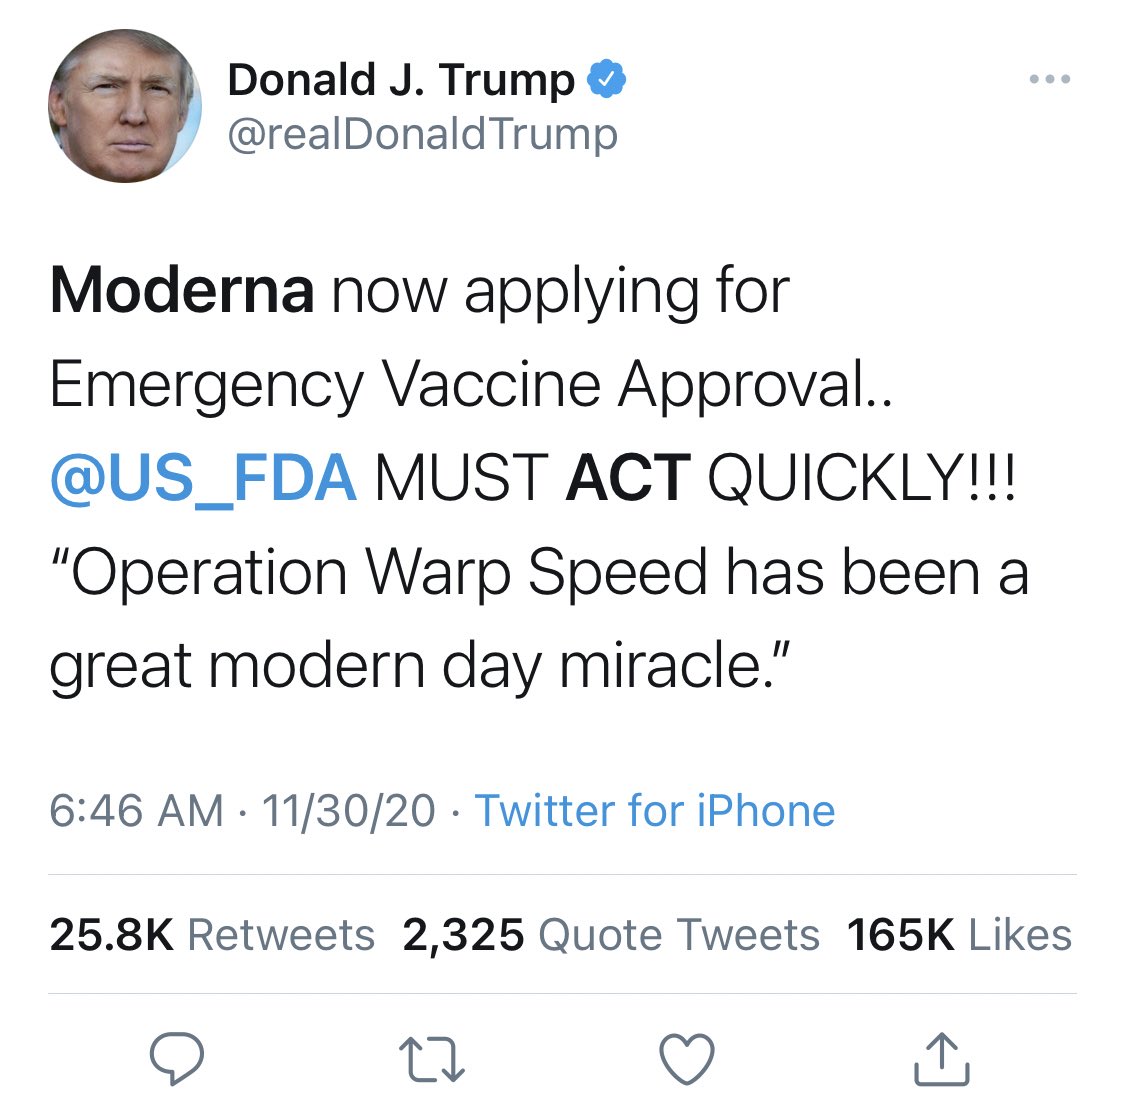 The Trump admin is all-in with Moderna. He partnered with Moderna in January before the pandemic (interesting), bought 100 million doses before their testing was done & “Warp Speed” funded them while he rushes the FDA to approve it even faster.